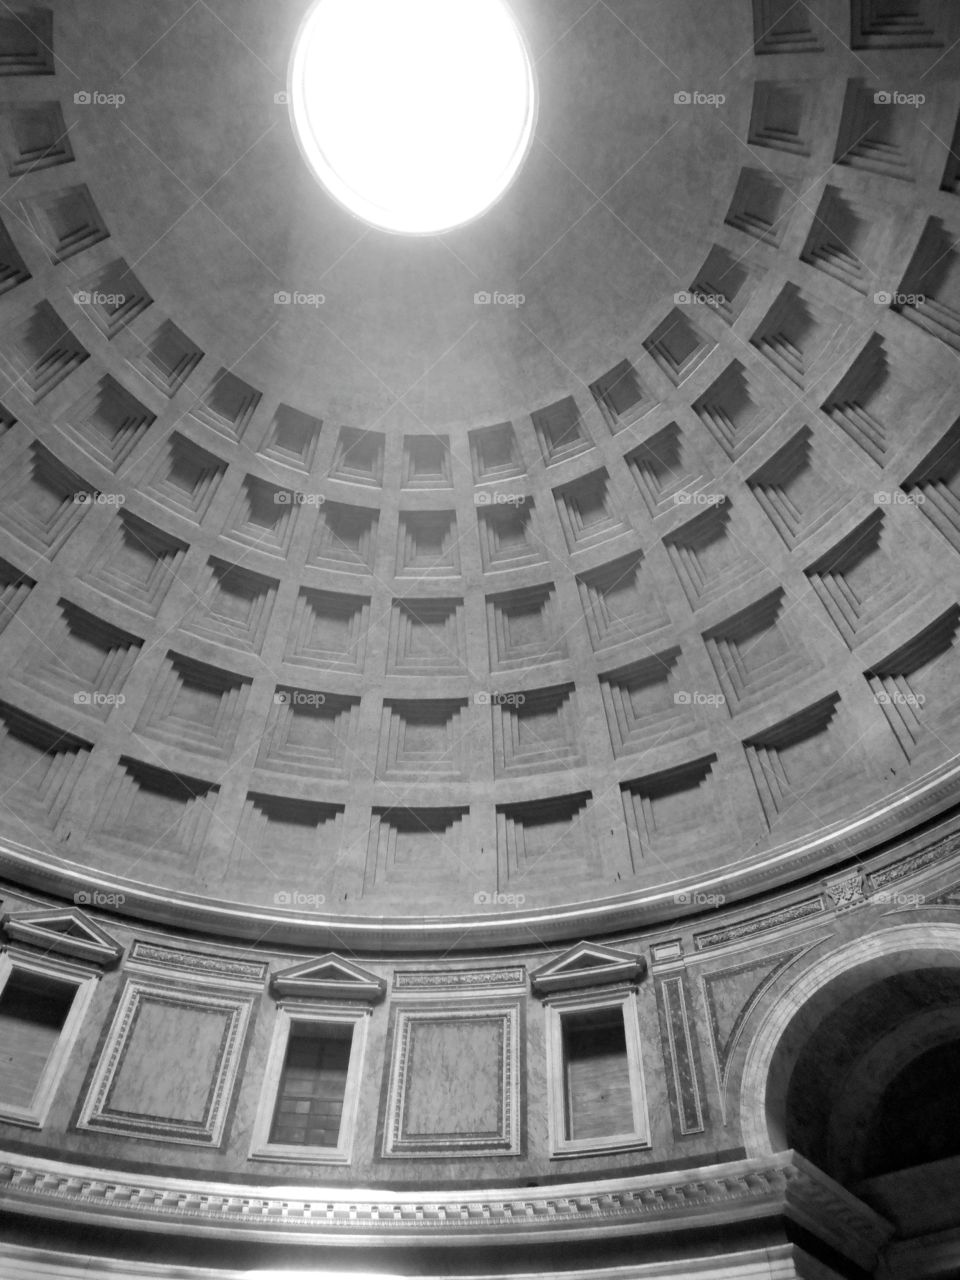 The natural lighting of the Pantheon makes it such a magical place. 